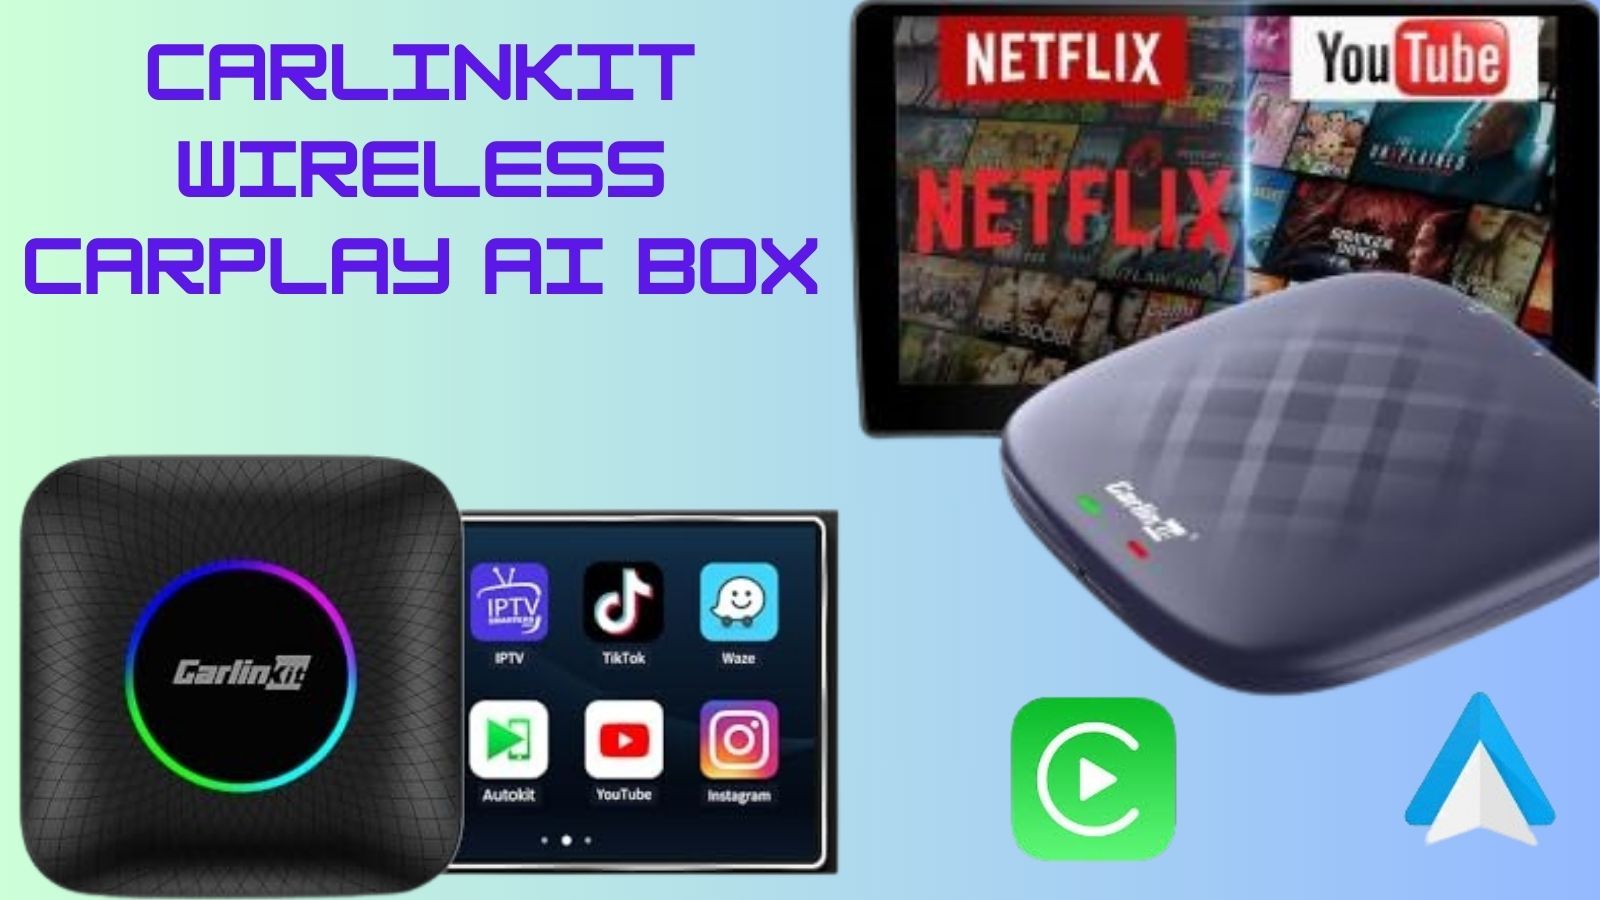 Carlinkit wireless CarPlay adapter for Netflix and Youtube video streaming